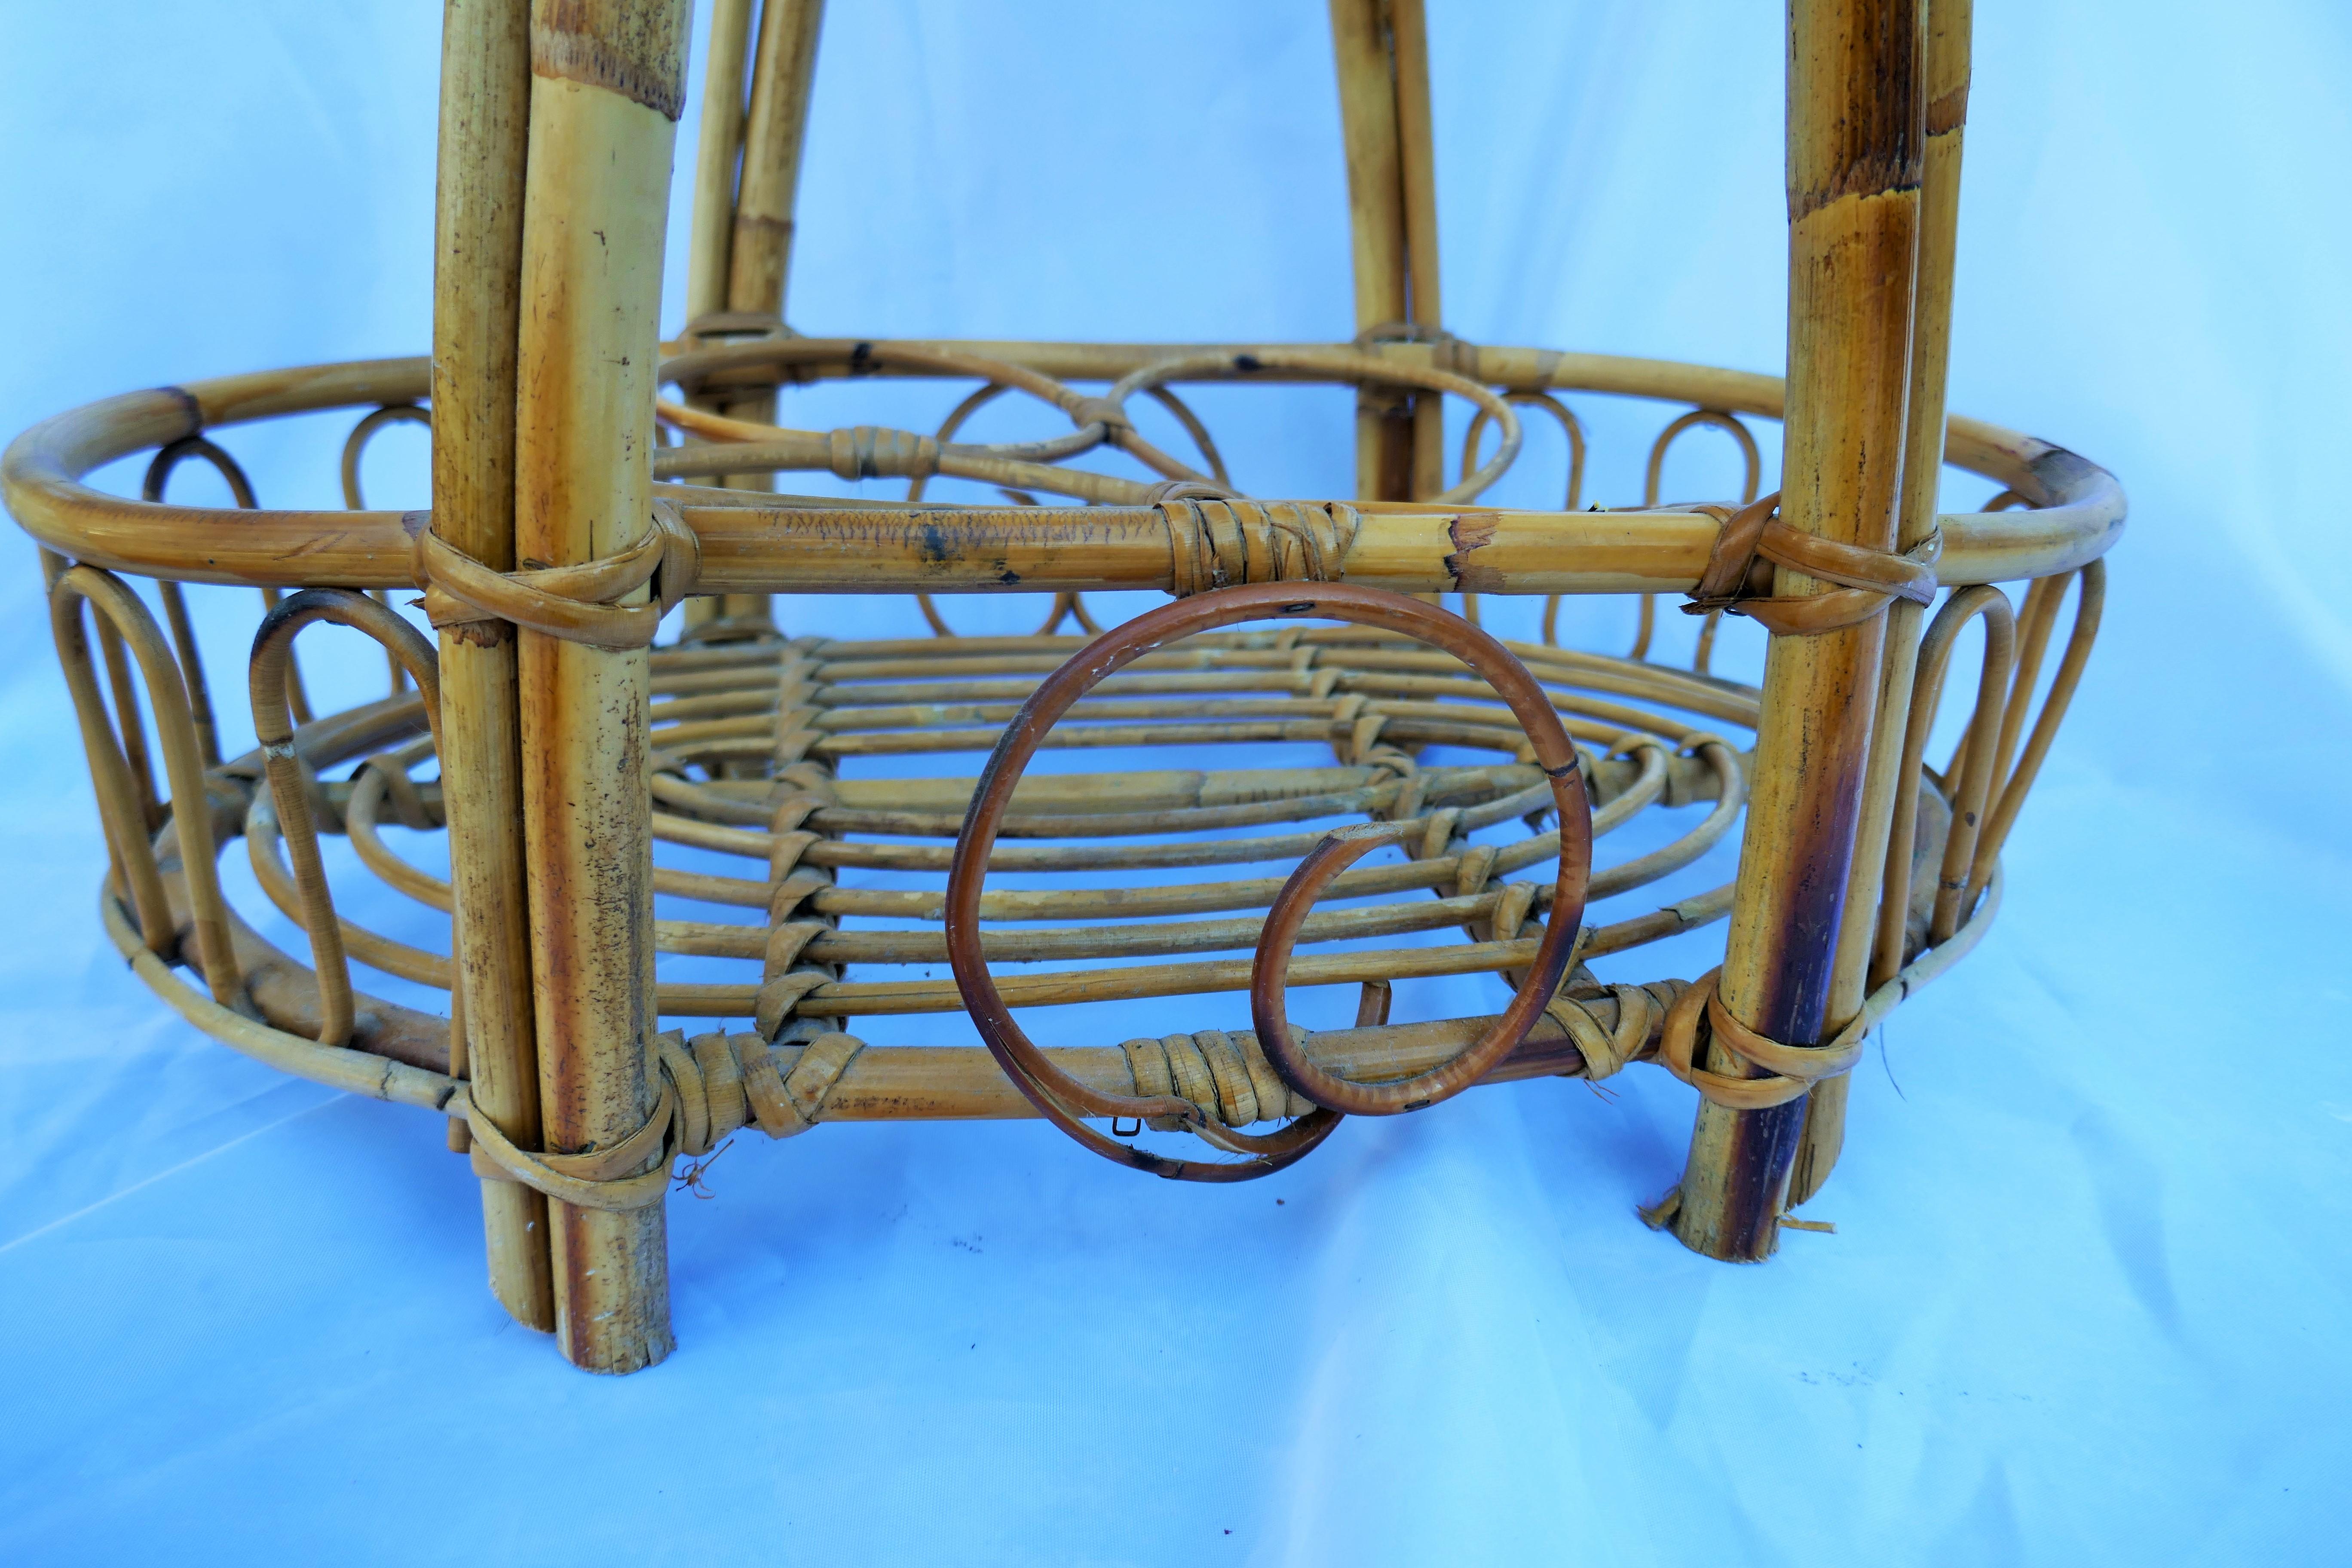 Bamboo/rattan bottle and glass holders for outdoor or indoor use, possible Dal Vera production 
Good Condition
Thank you